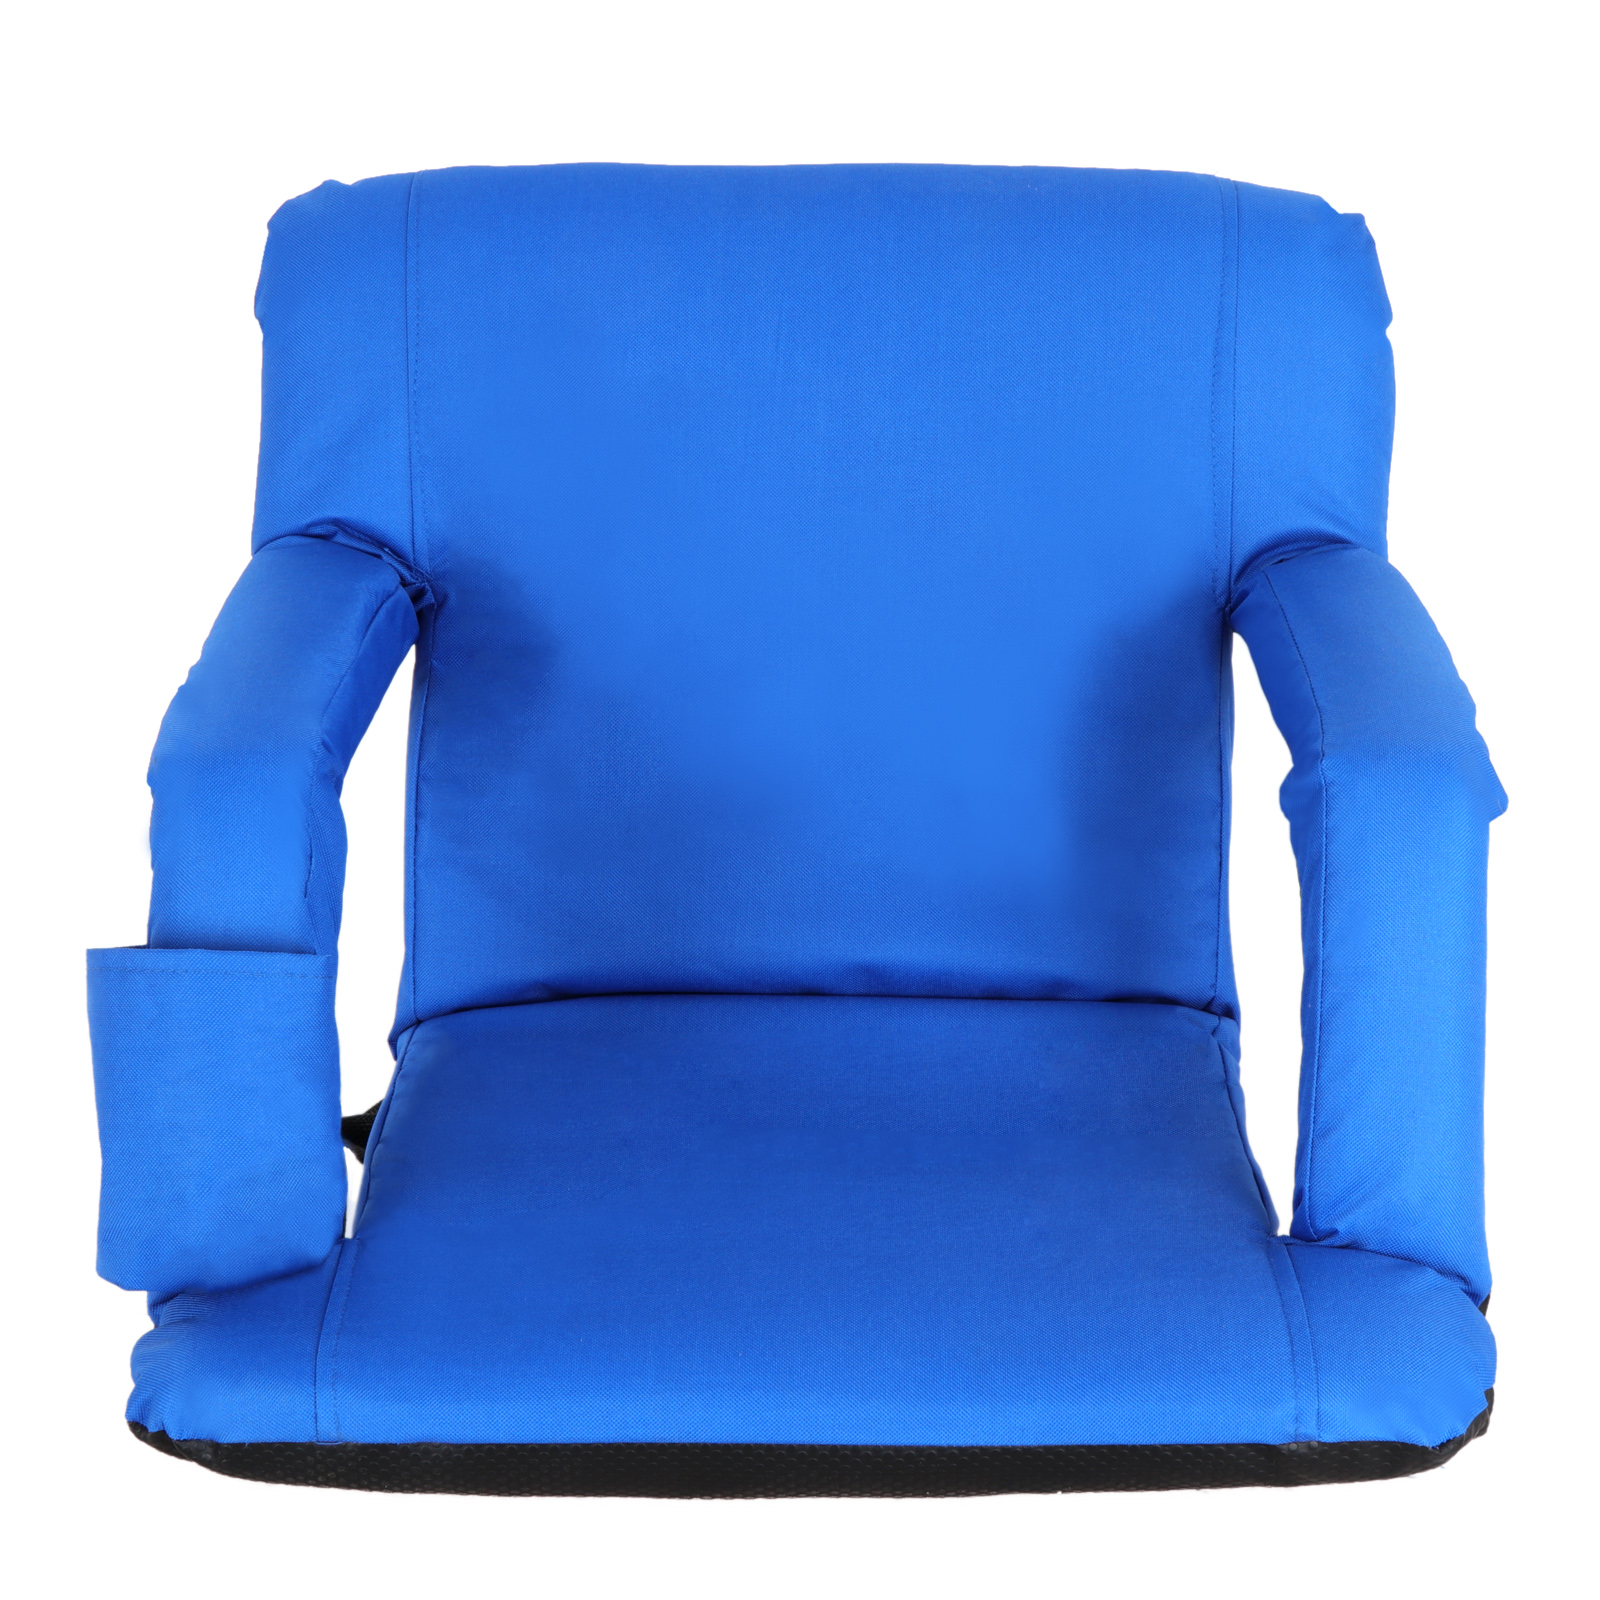 ZENY Stadium Seats Chairs for Bleachers or Benches - 5 Reclining Positions  (Blue) - Walmart.com